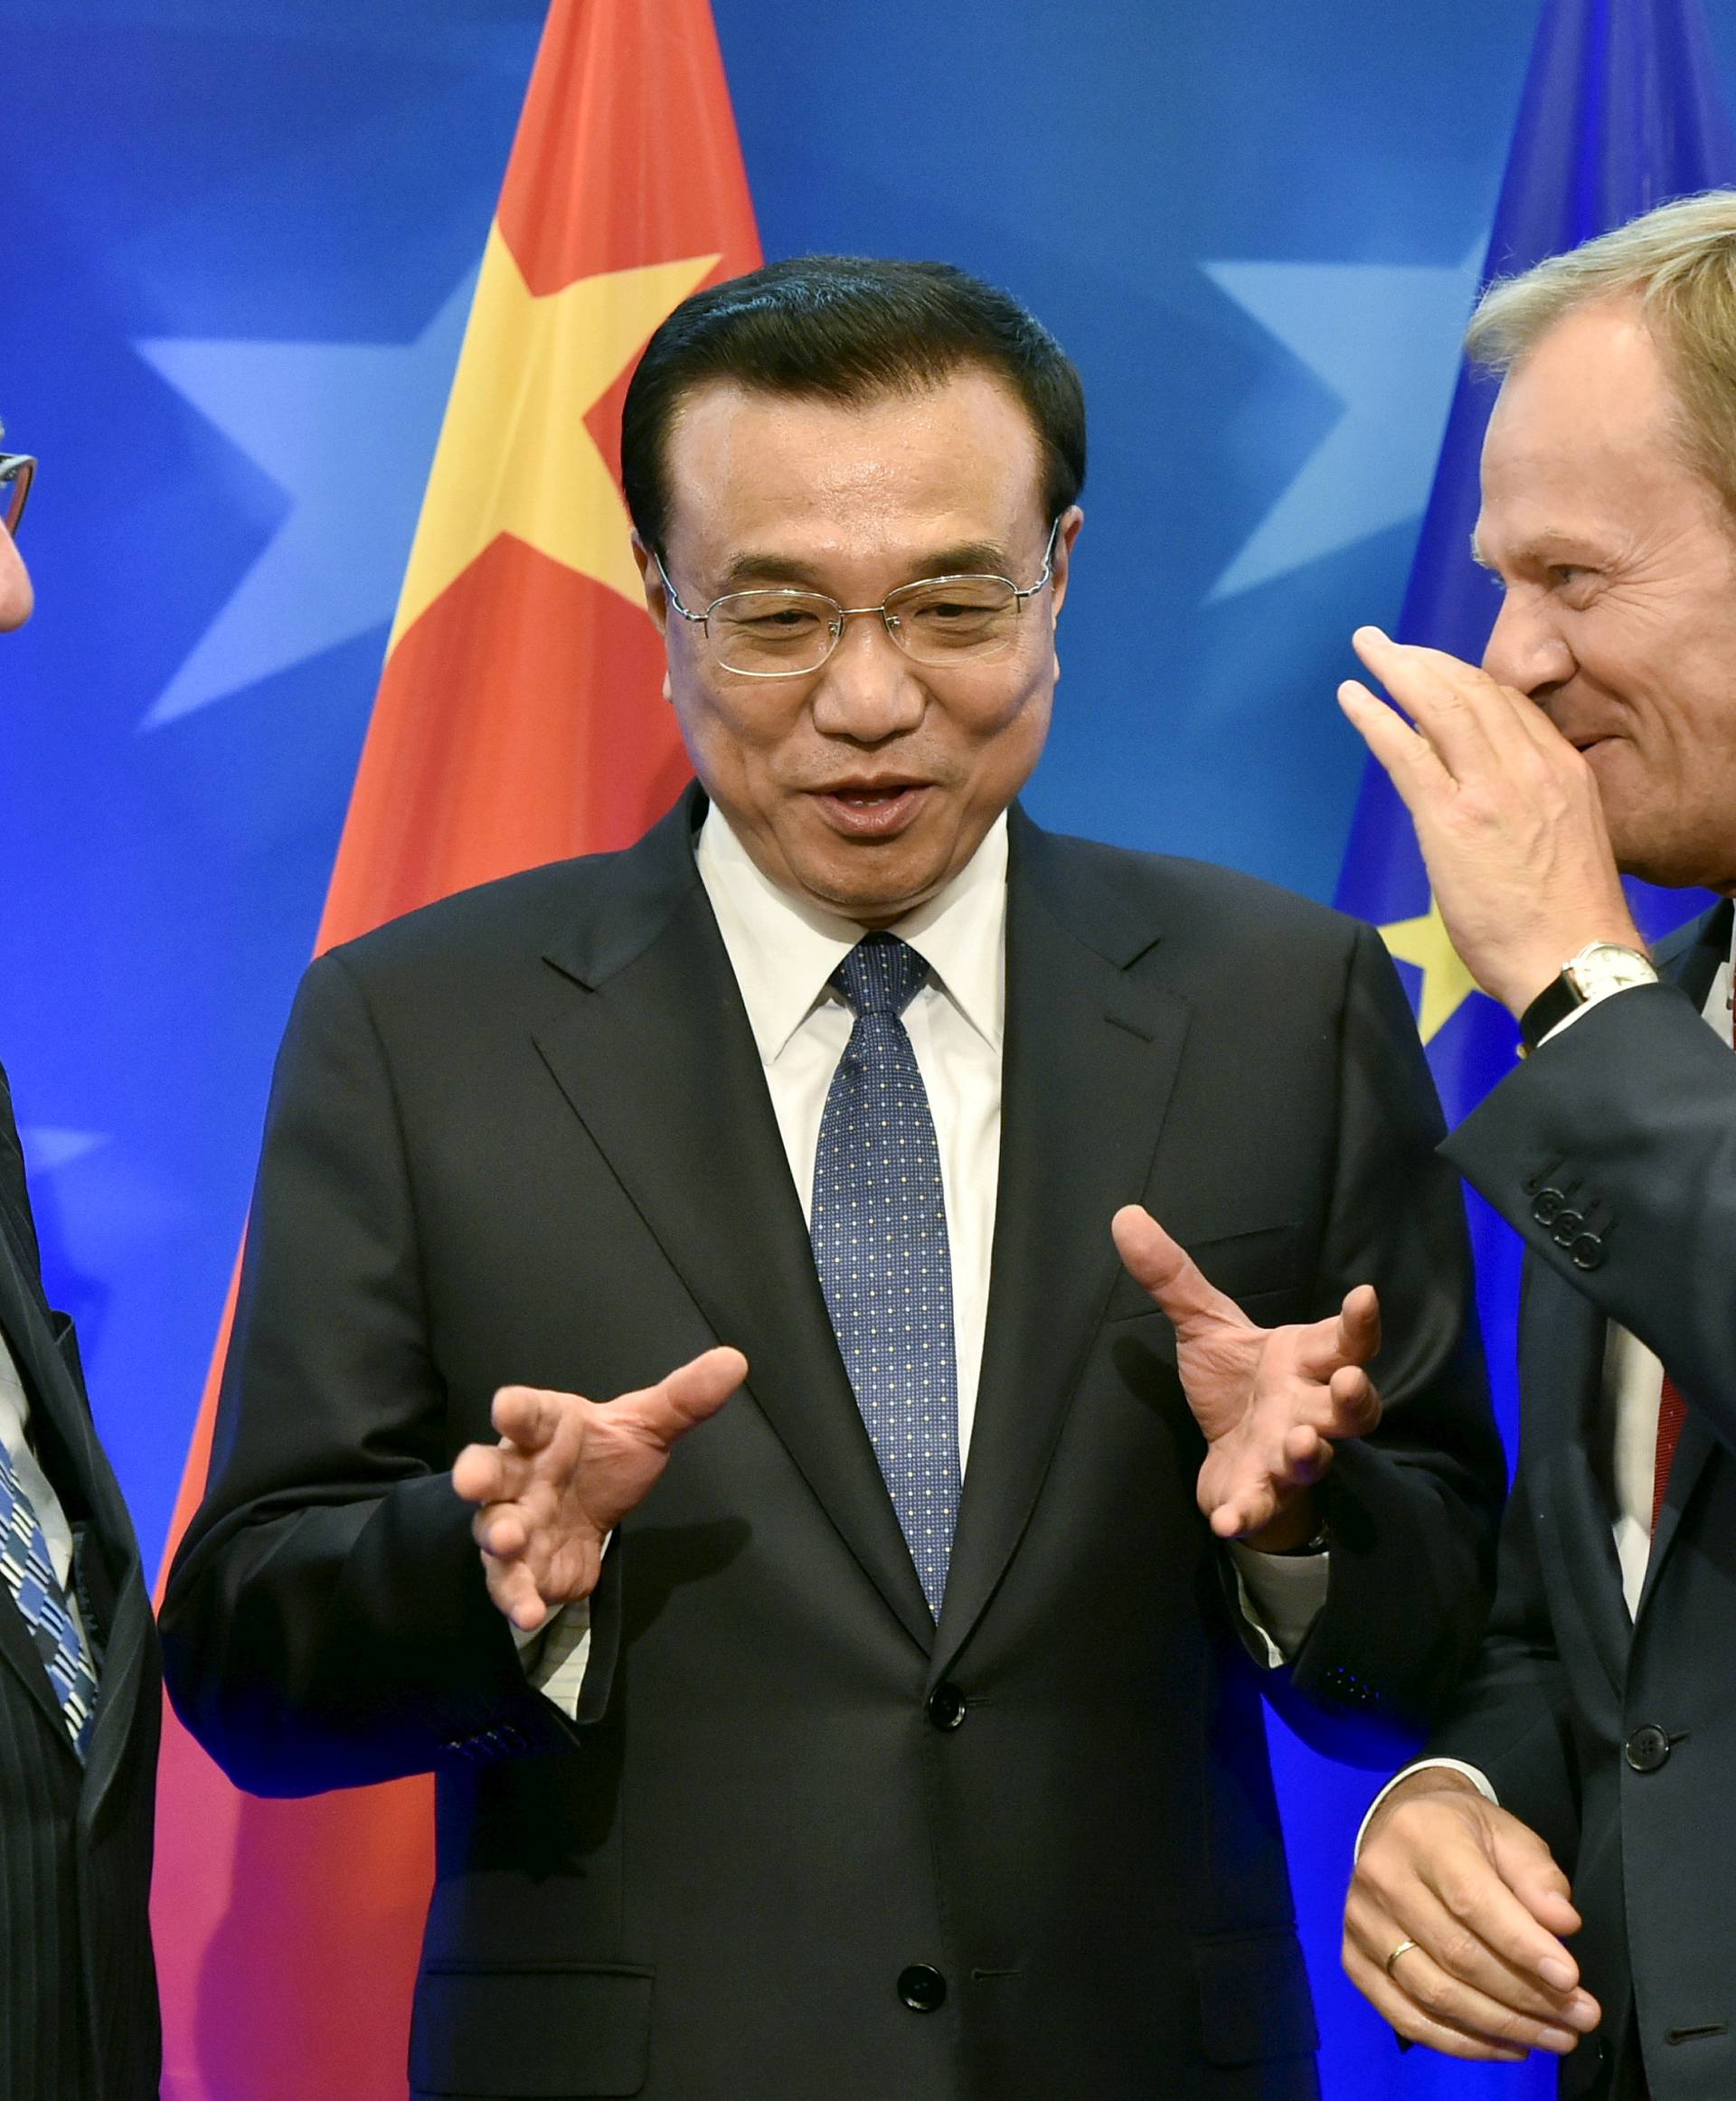 FILE PHOTO: European Commission President Jean Claude Juncker, Chinese Premier Li Keqiang and European Council President Donald Tusk attend a signing ceremony during a EU-China summit in Brussels in 2015